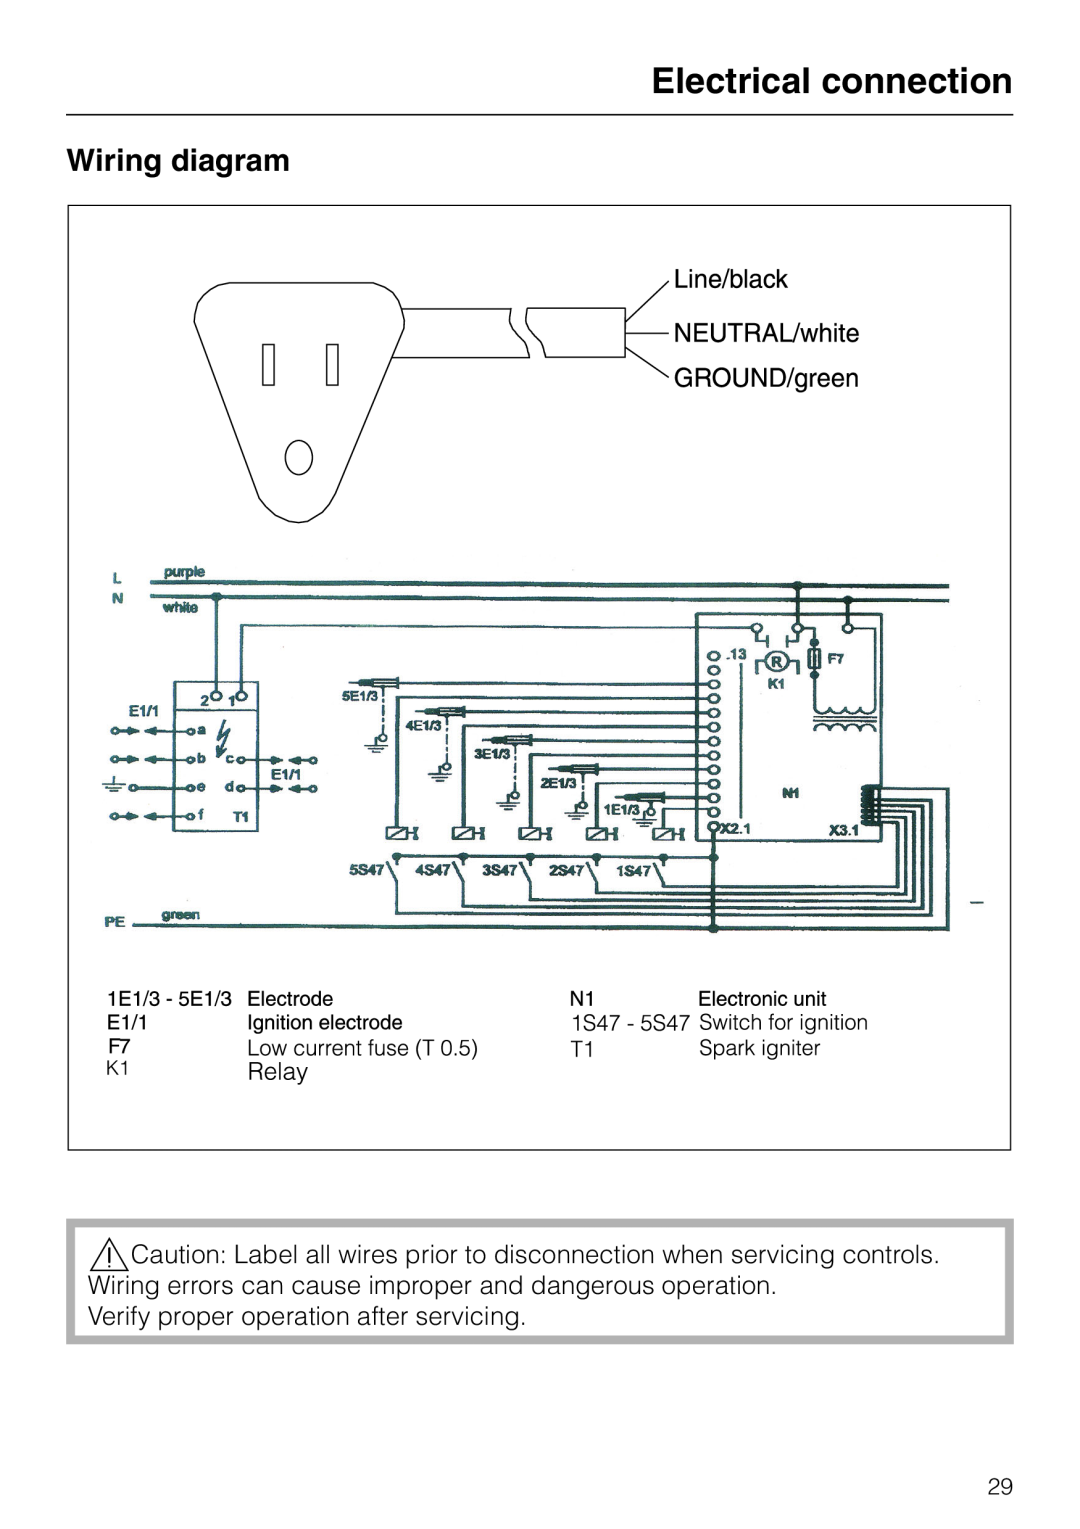 Miele KM 391 manual Wiring diagram, Electrical connection, Verify proper operation after servicing 